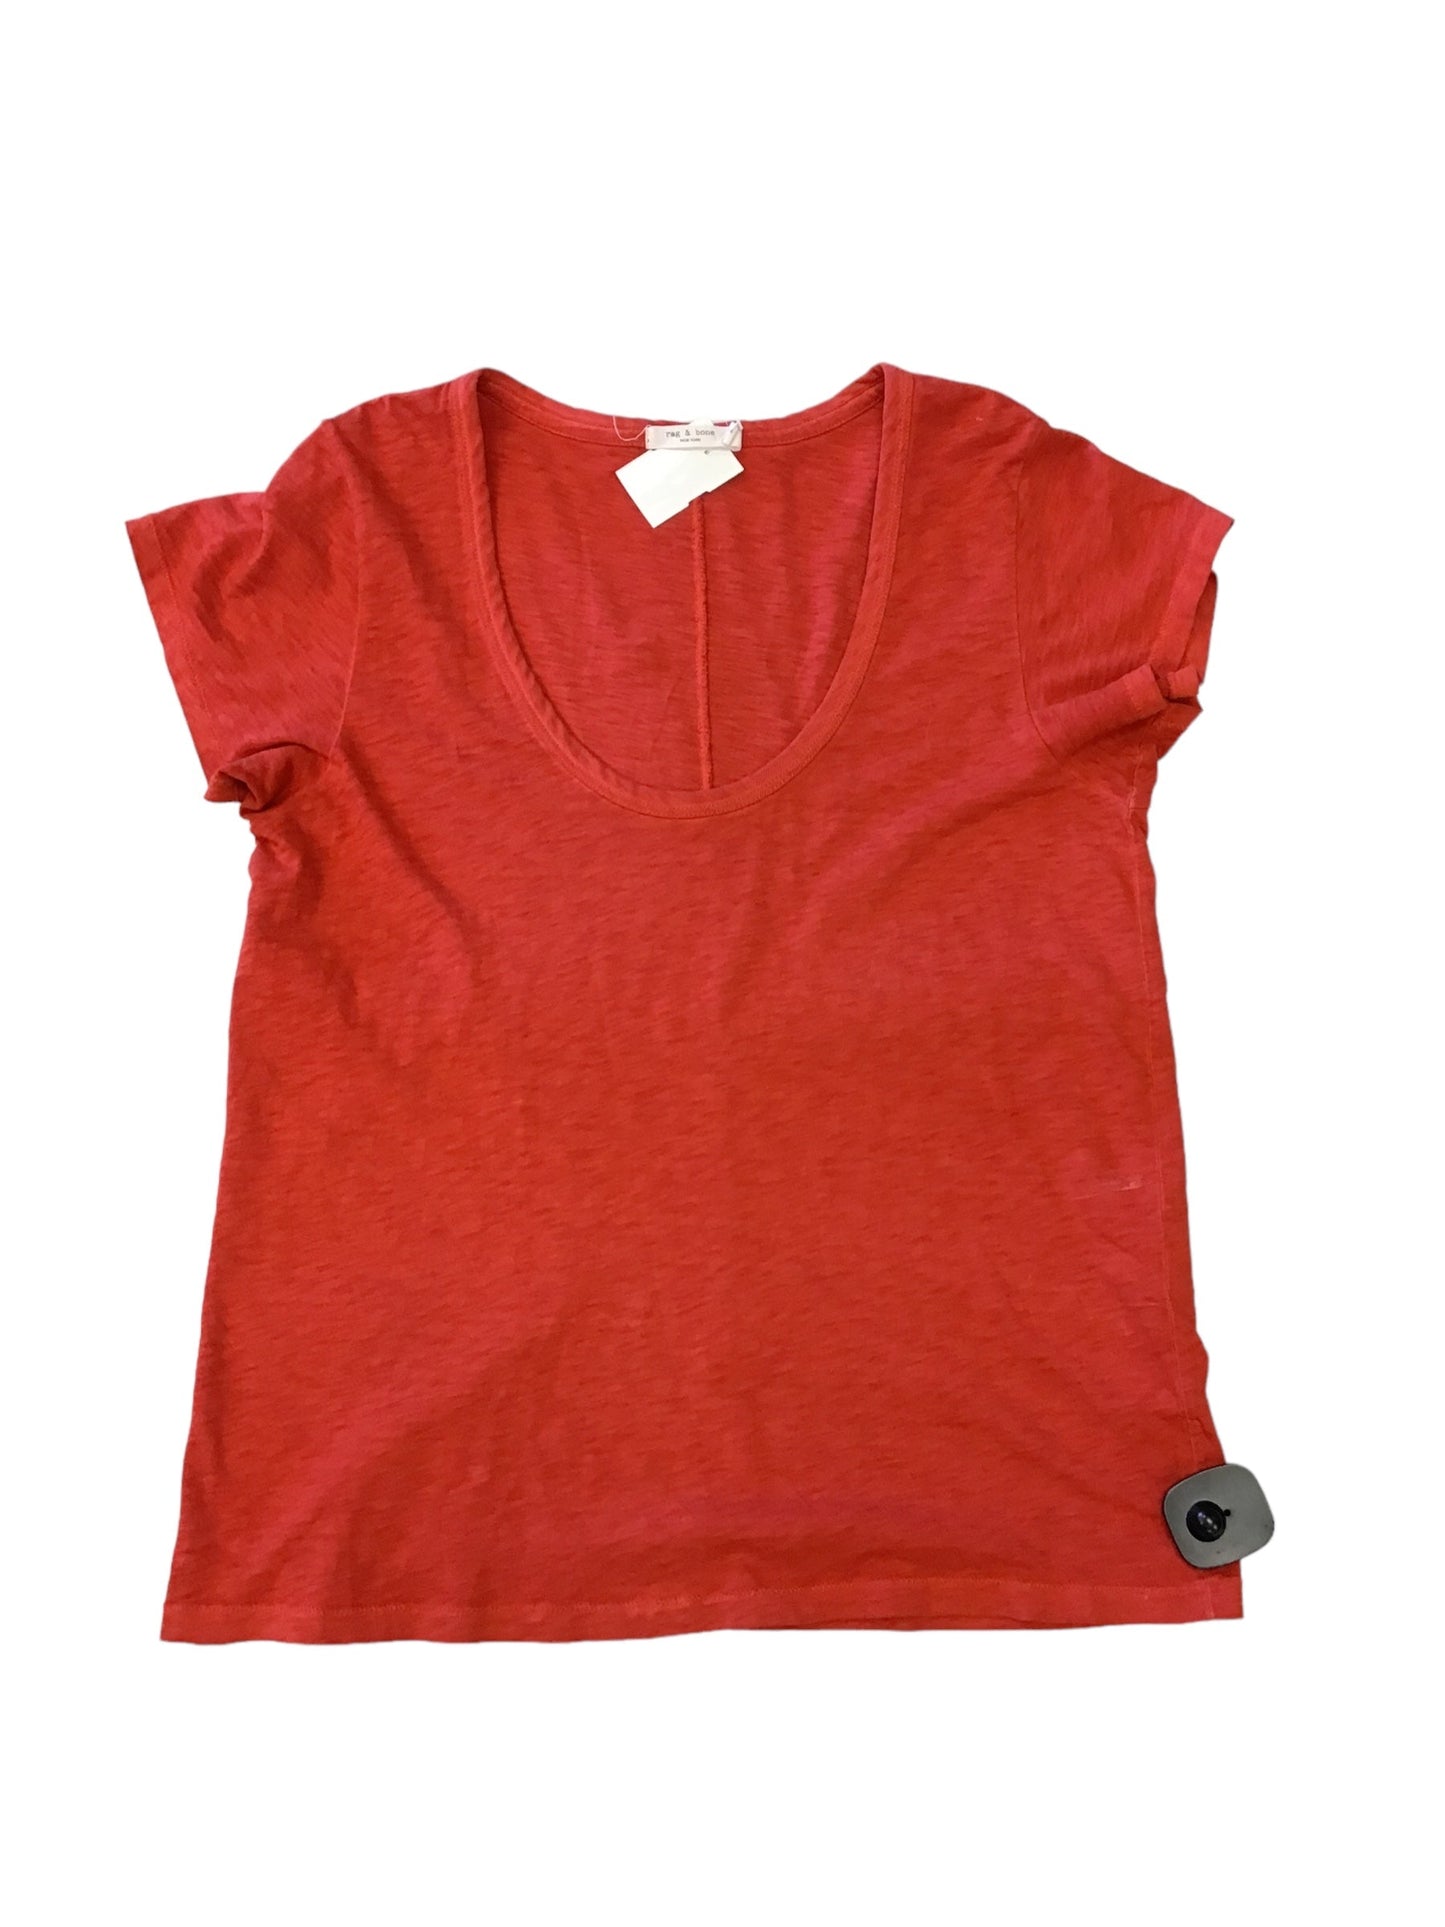 Red Top Short Sleeve Rag And Bone, Size M